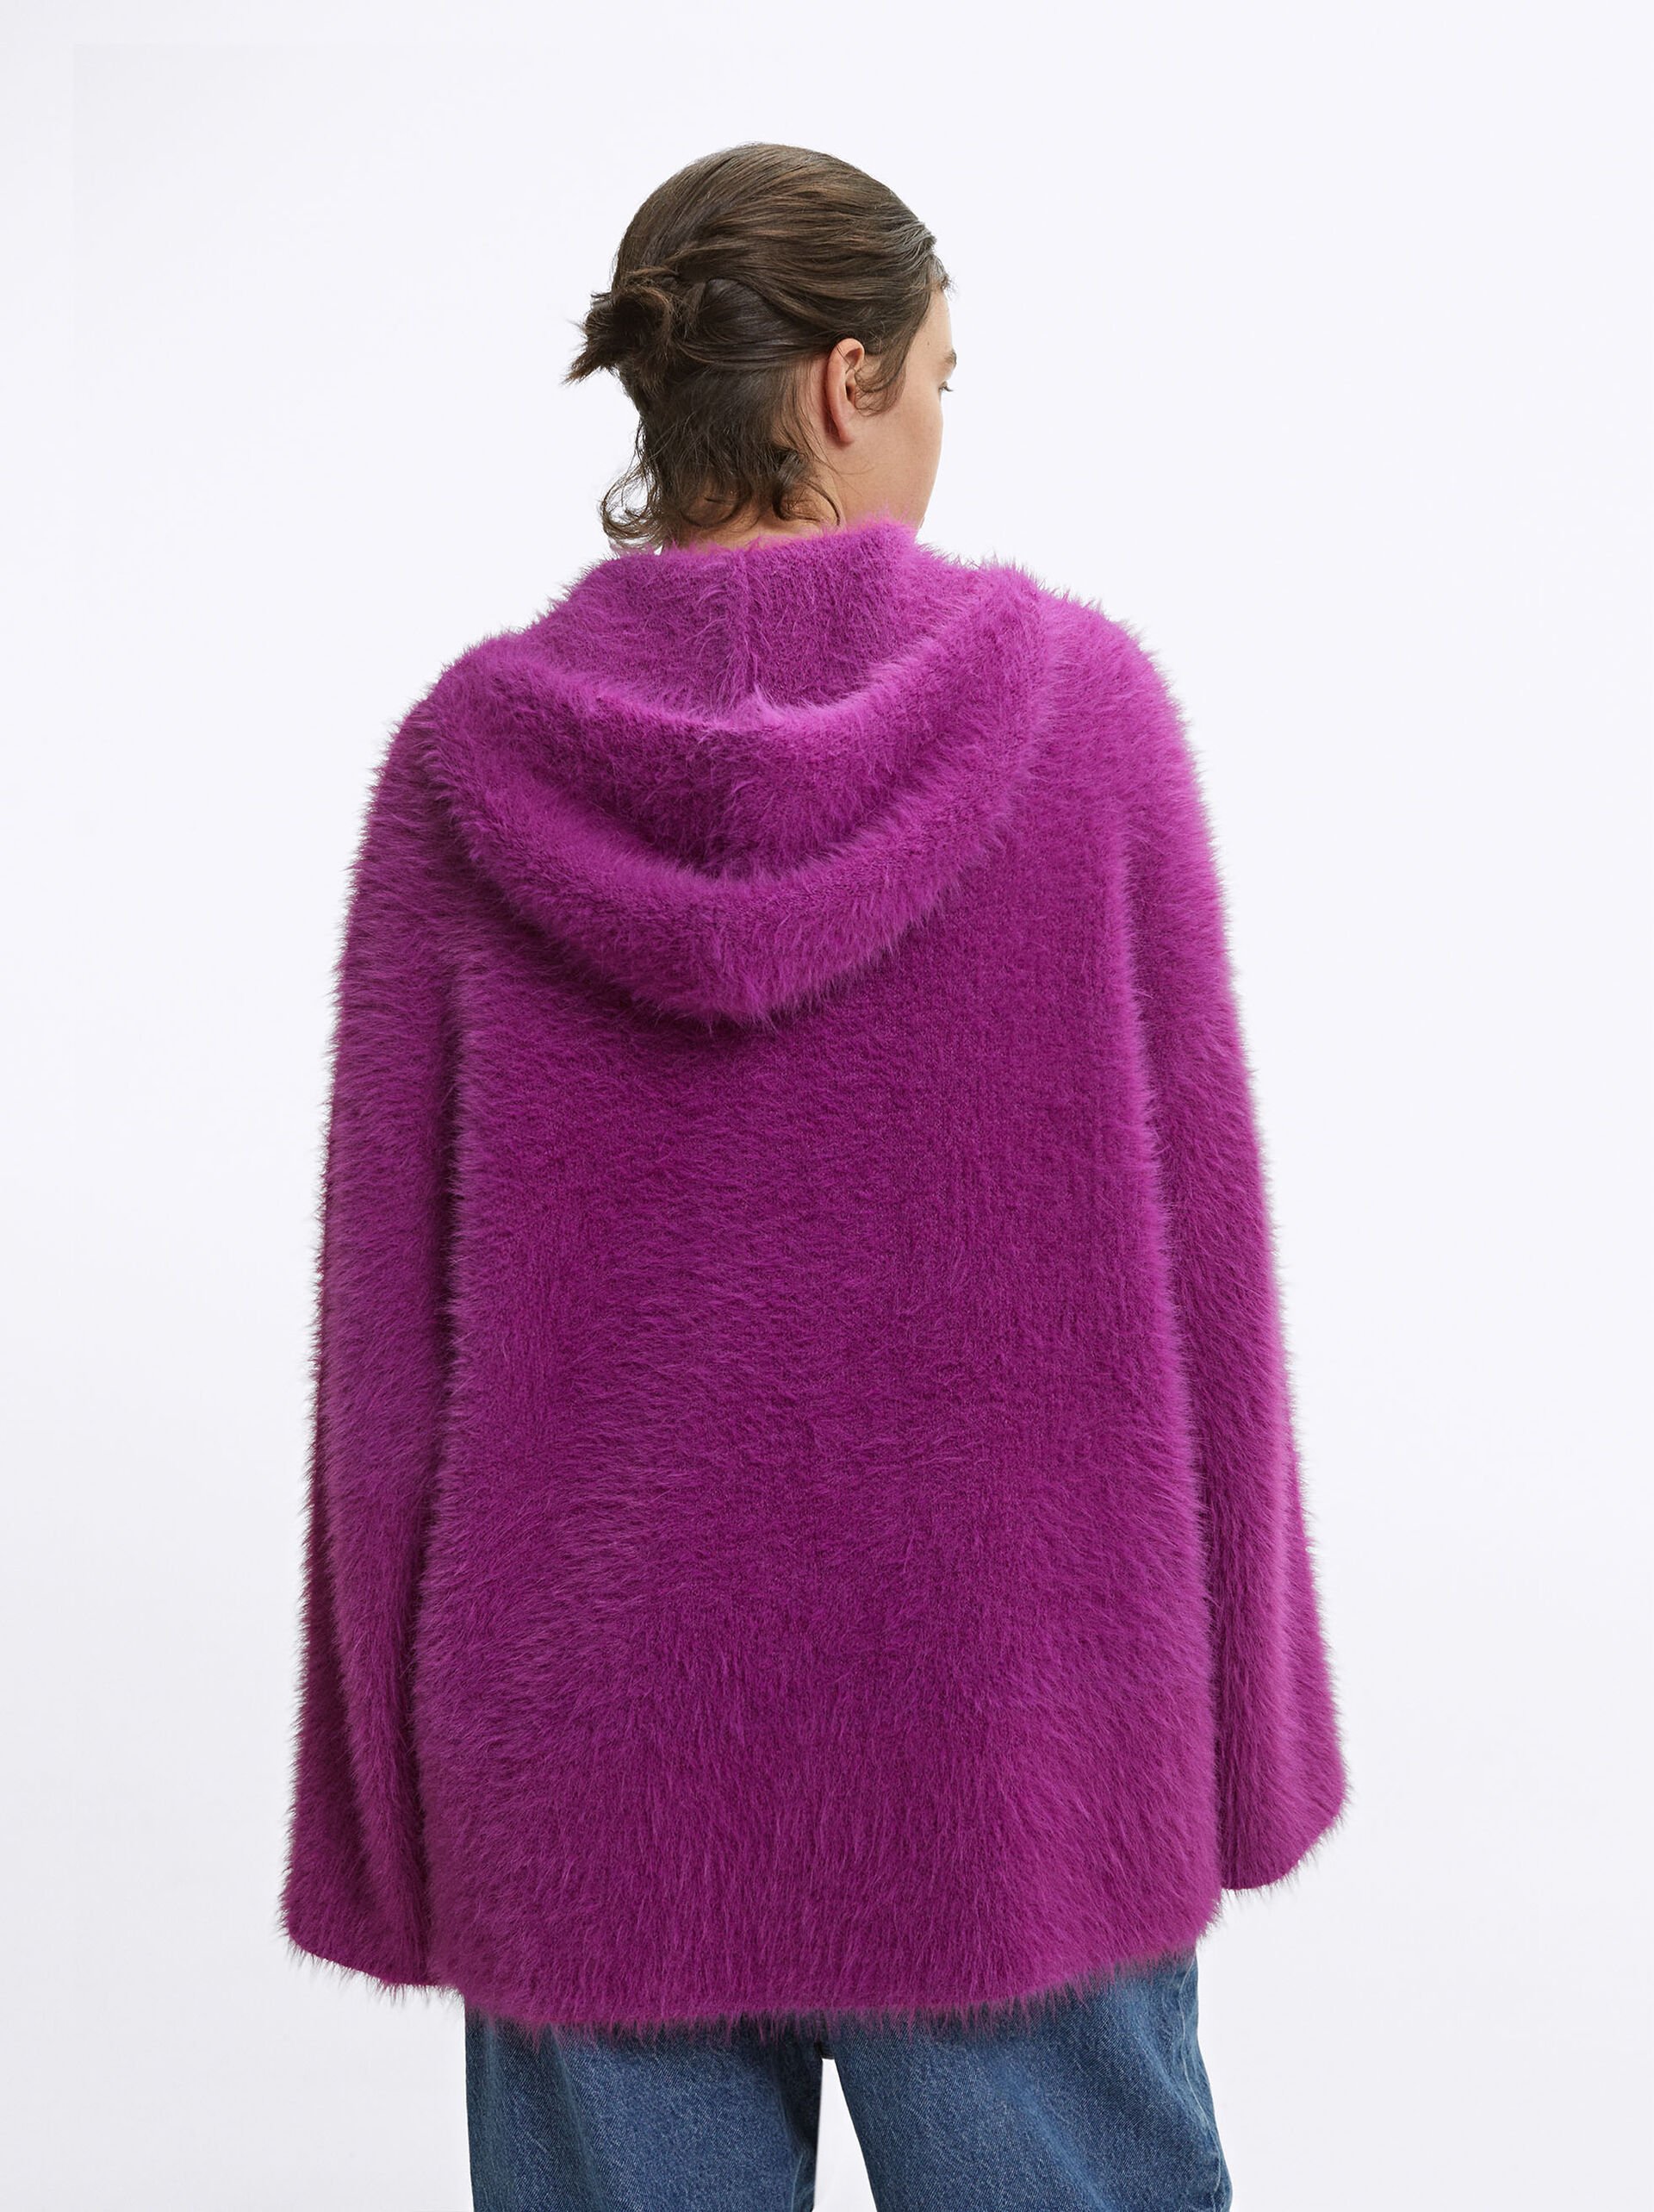 Fur Effect Knitted Cardigan image number 4.0